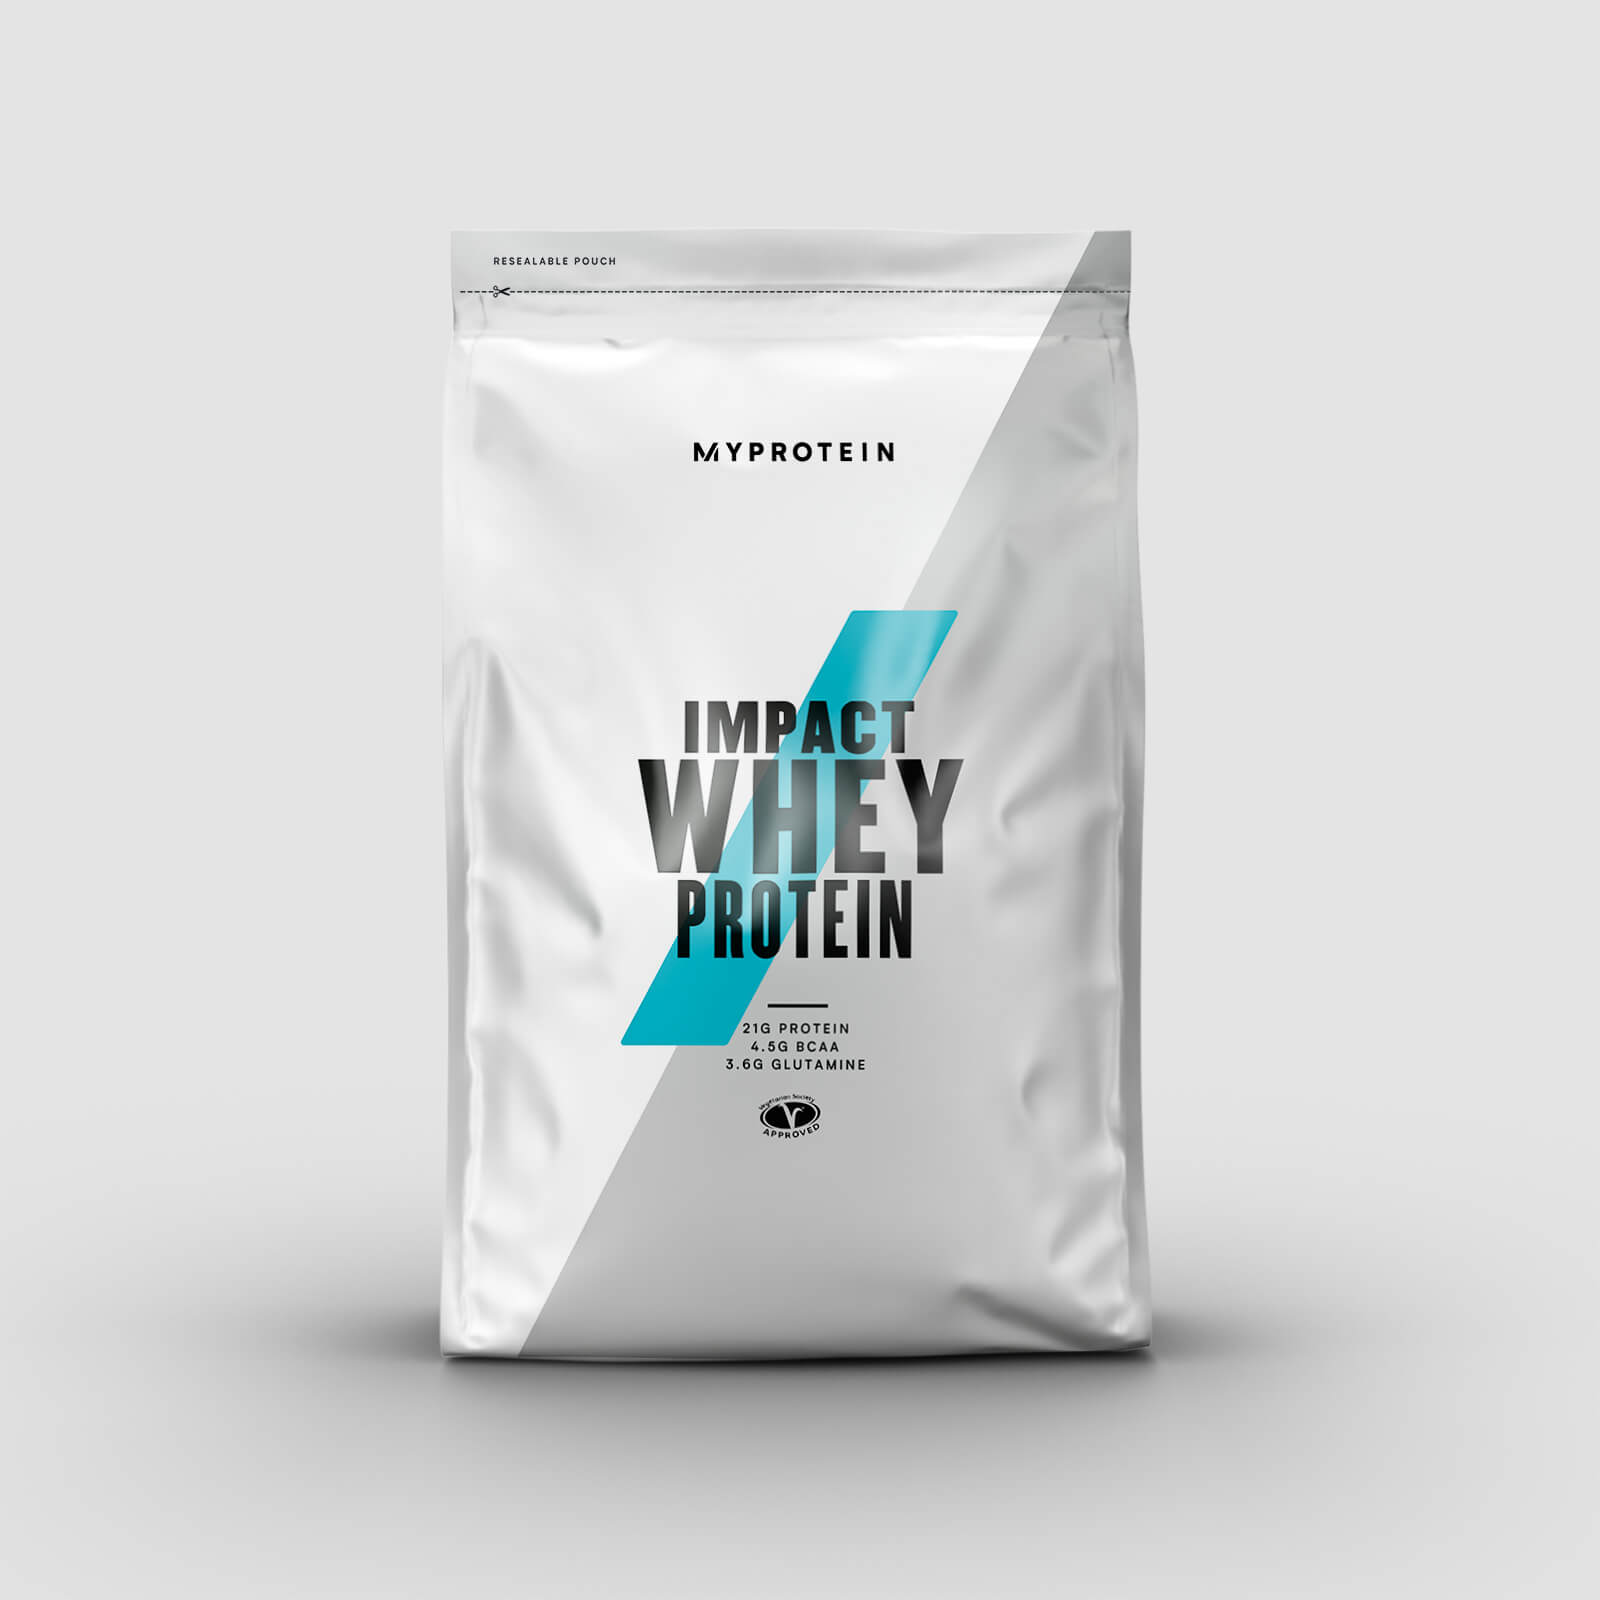 Myprotein Vassleprotein - Impact Whey Protein - 2.5kg - Chocolate Coconut - New and Improved